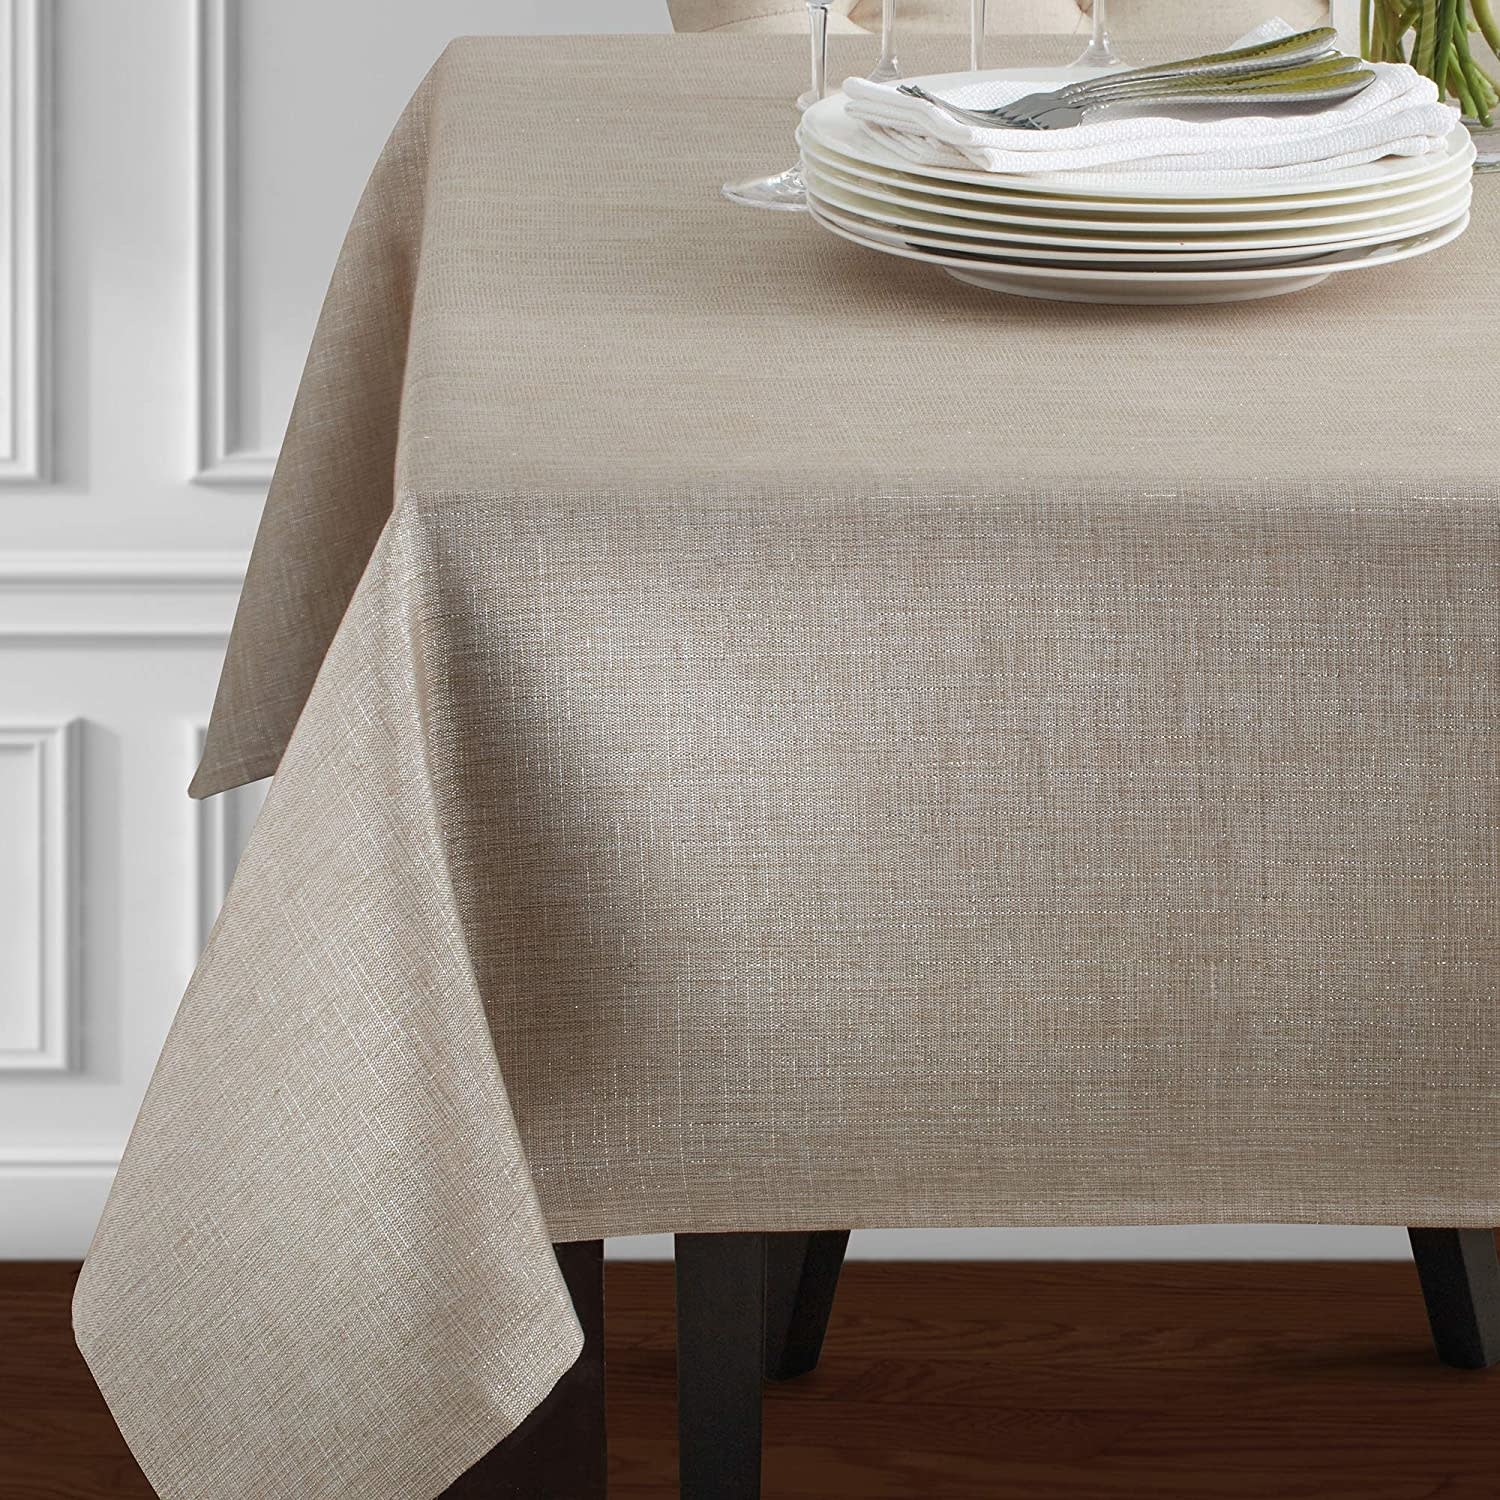 Eclipse Metallic Taupe Tablecloth 60 x 120